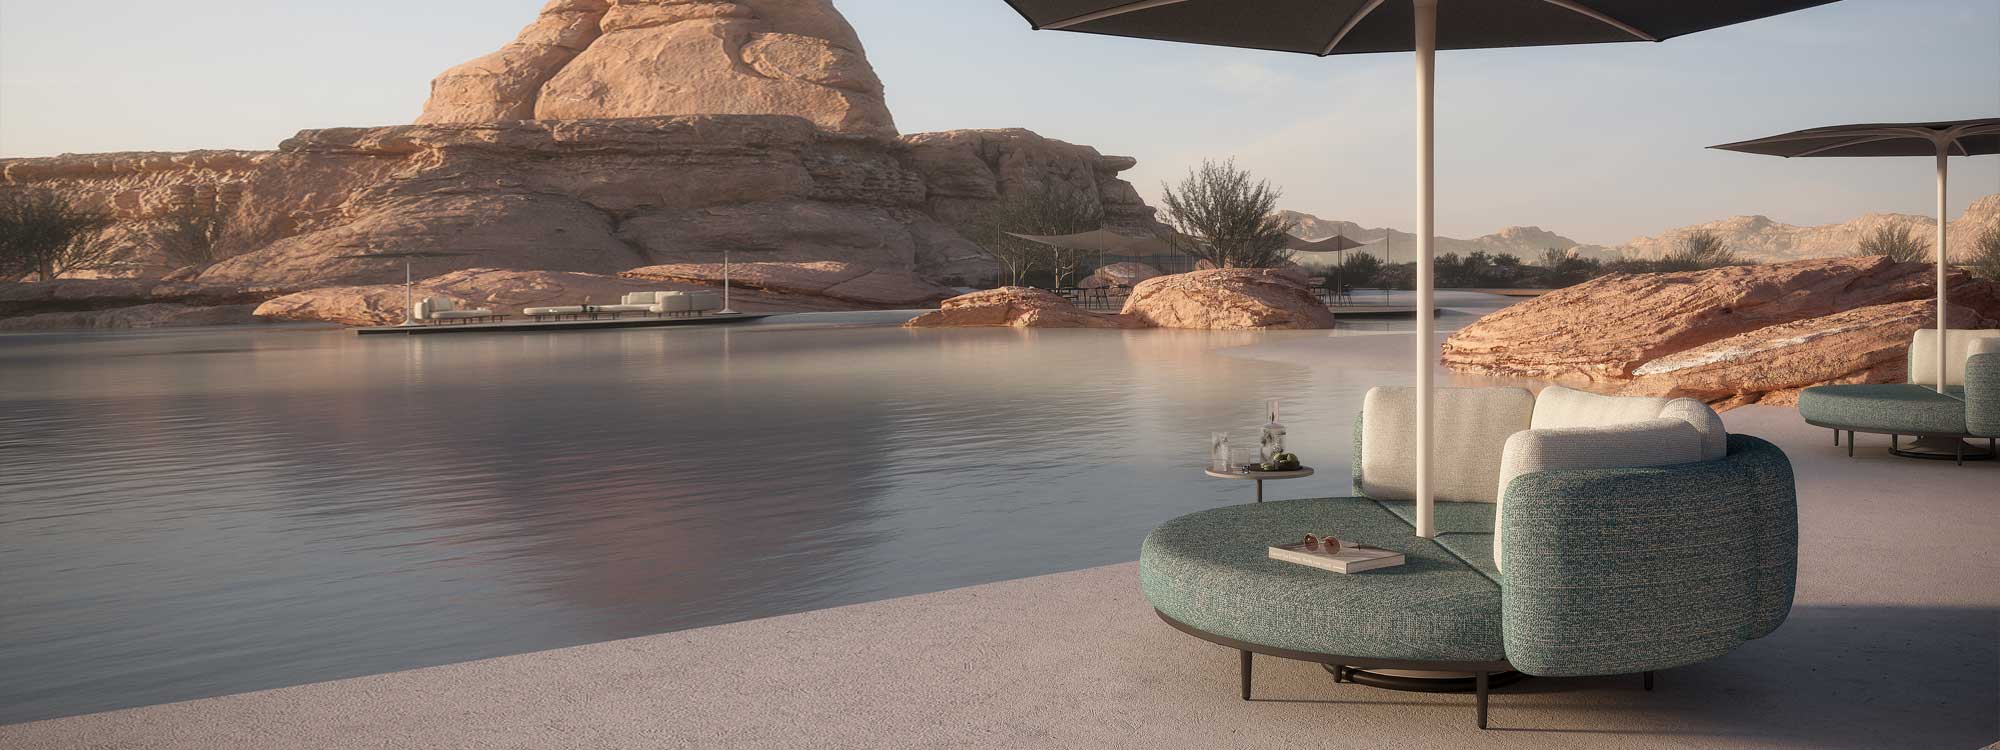 Royal Botania Organix daybed on shore of oasis surrounded by arid mountains